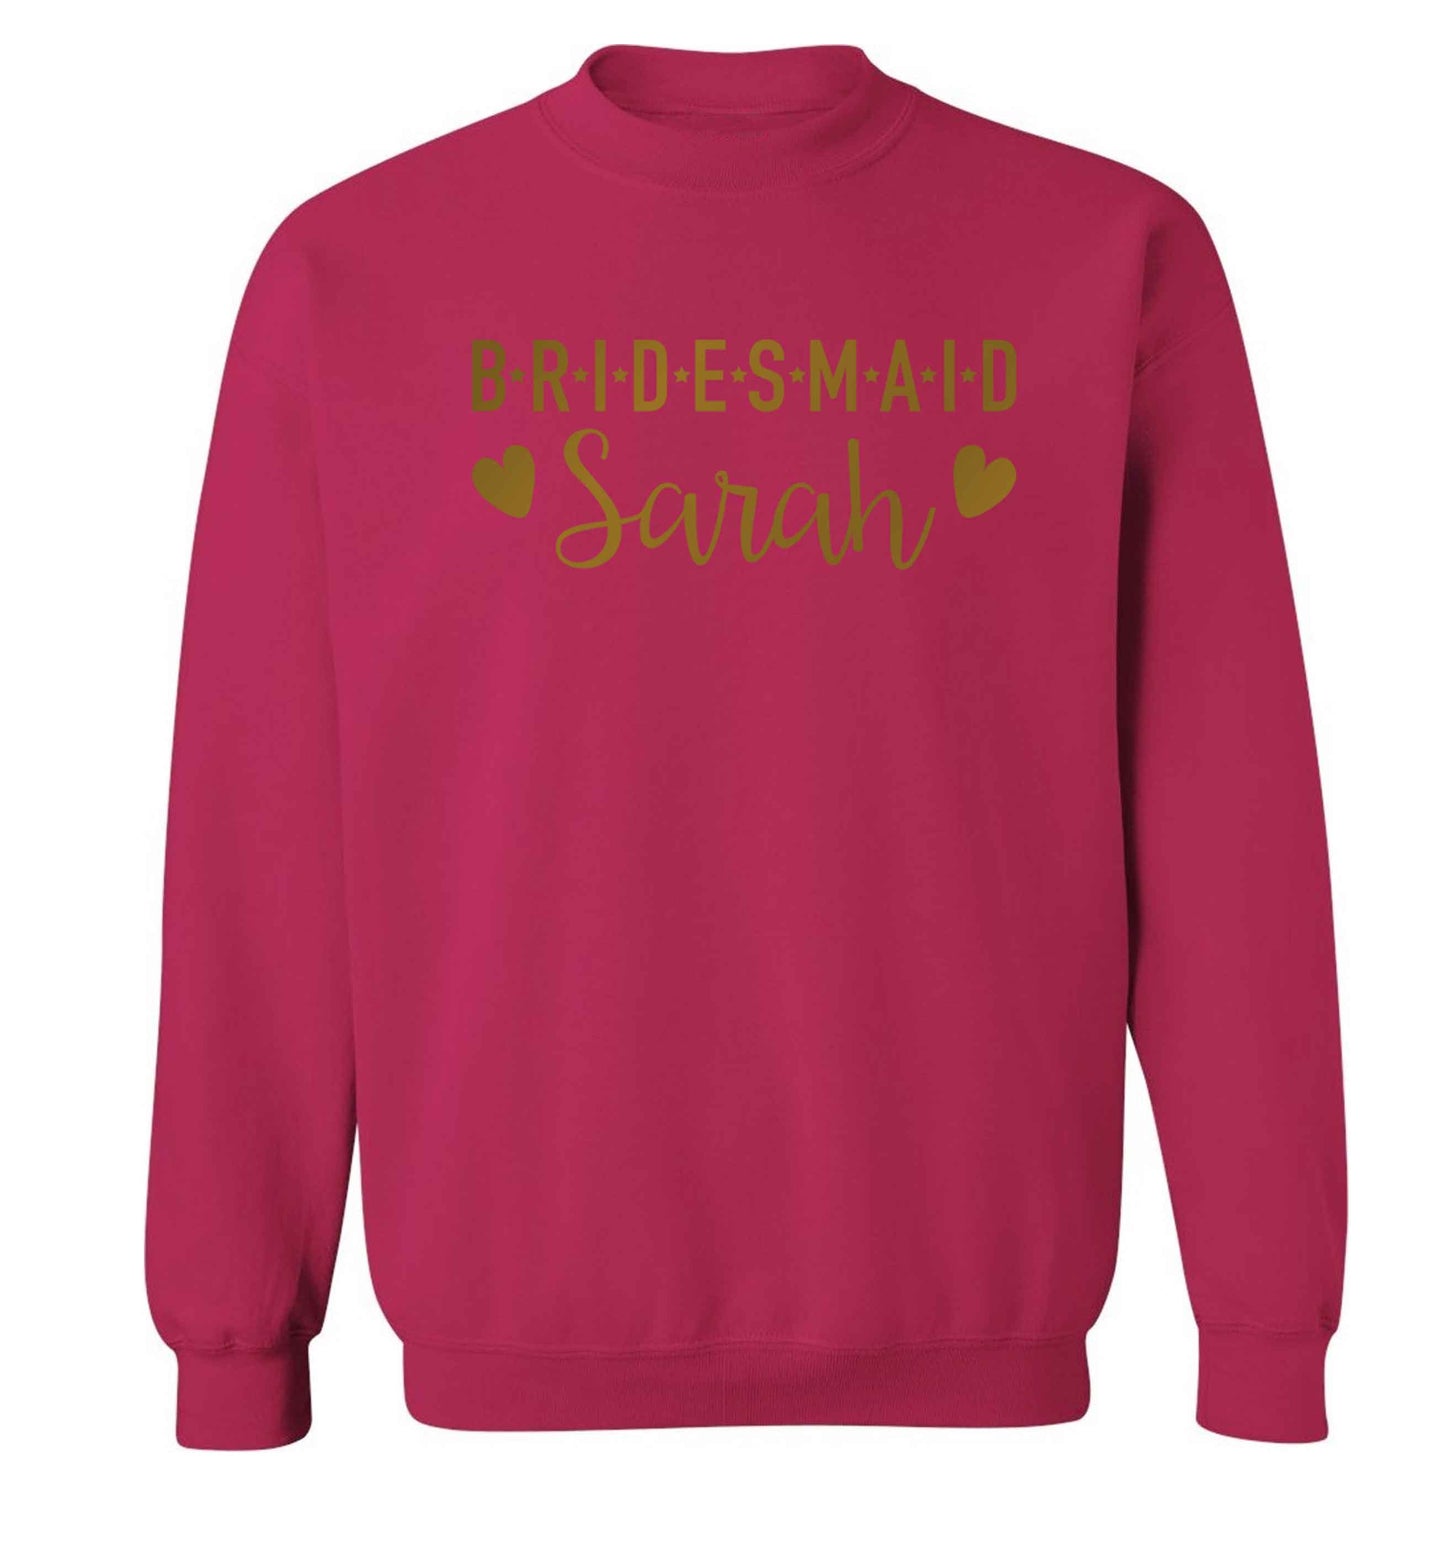 Personalised bridesmaid Adult's unisex pink Sweater 2XL